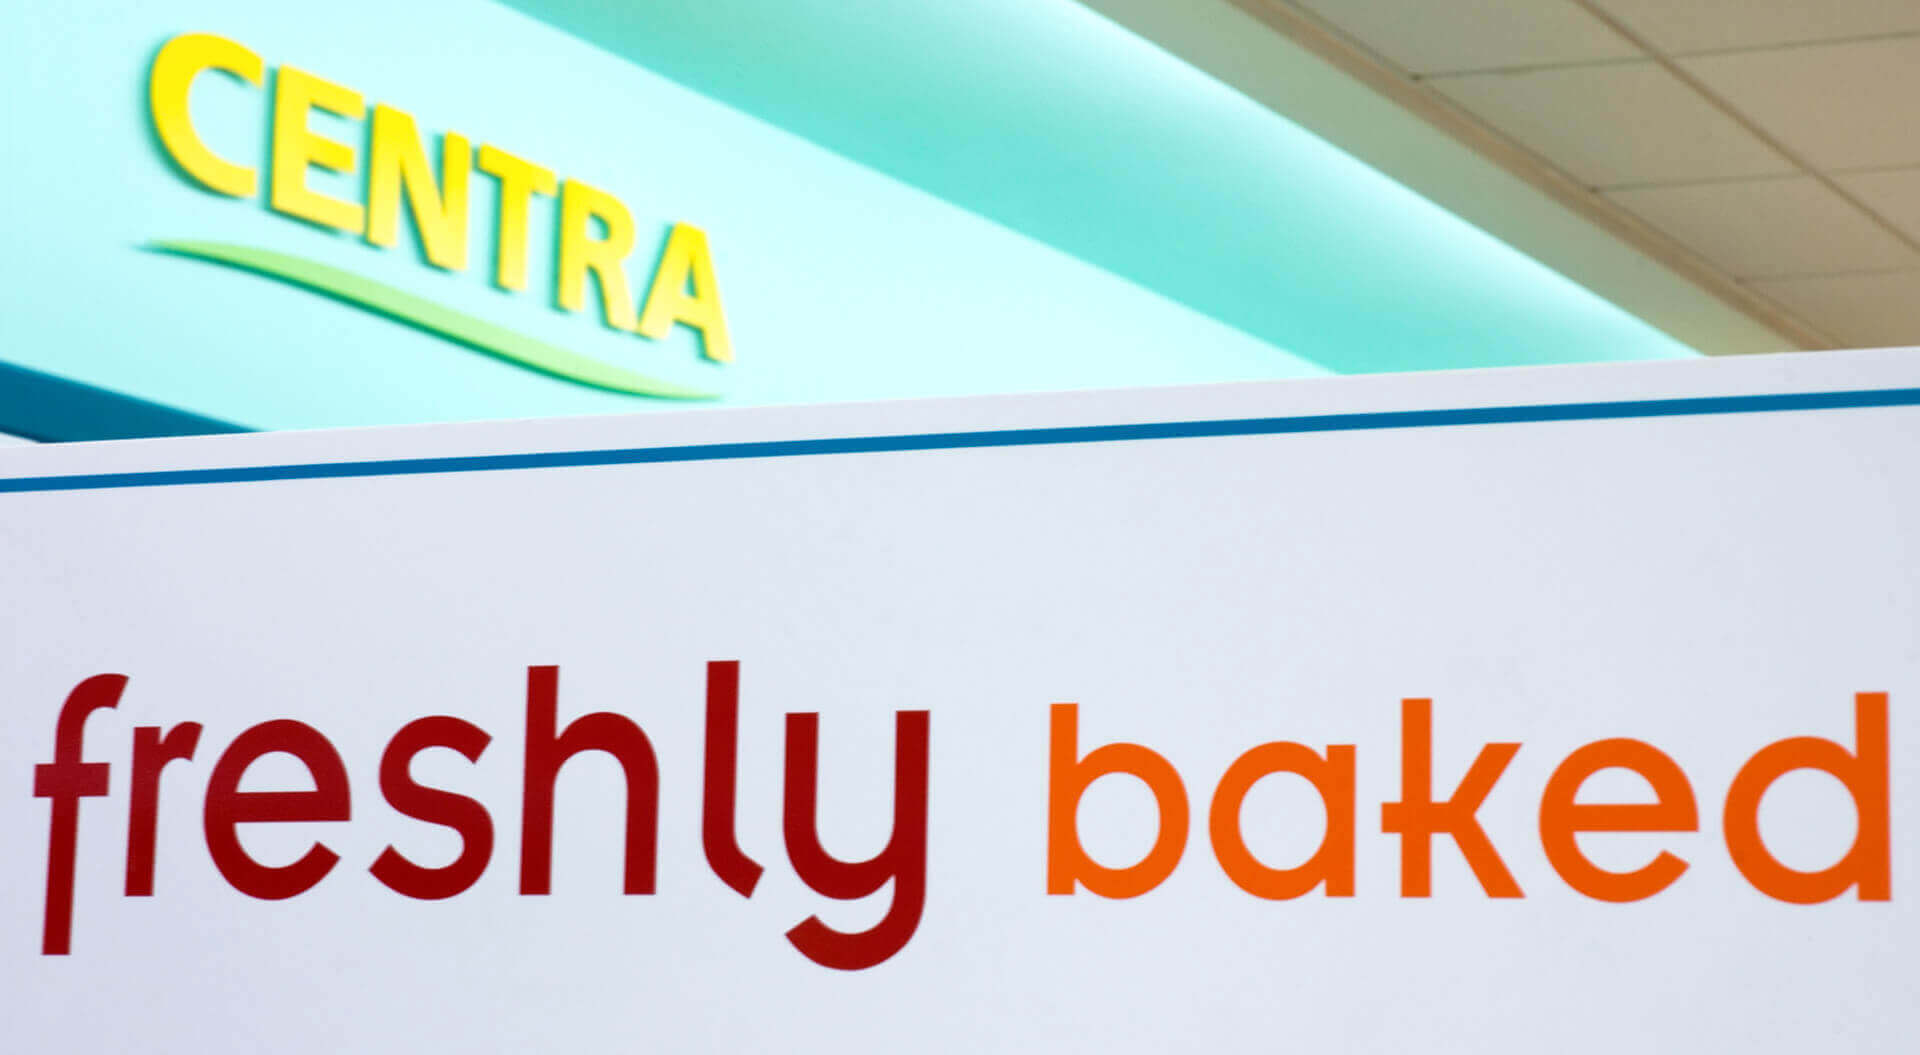 Centra convenience store signage